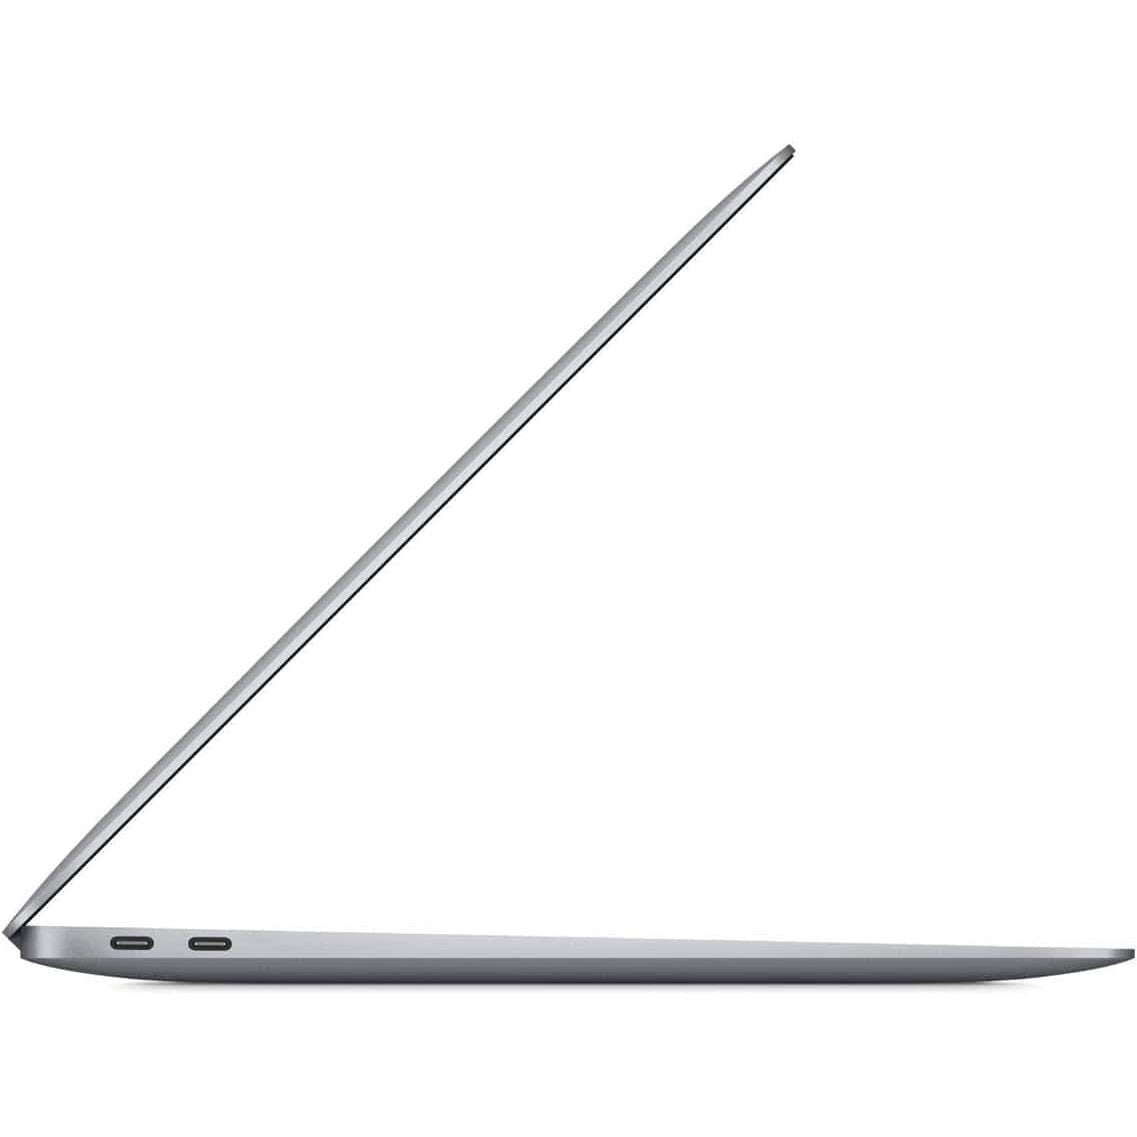 MacBook Air 13.3-inch Laptop with M1 Chip - 8GB RAM - 512GB SSD - Space Gray (2020)